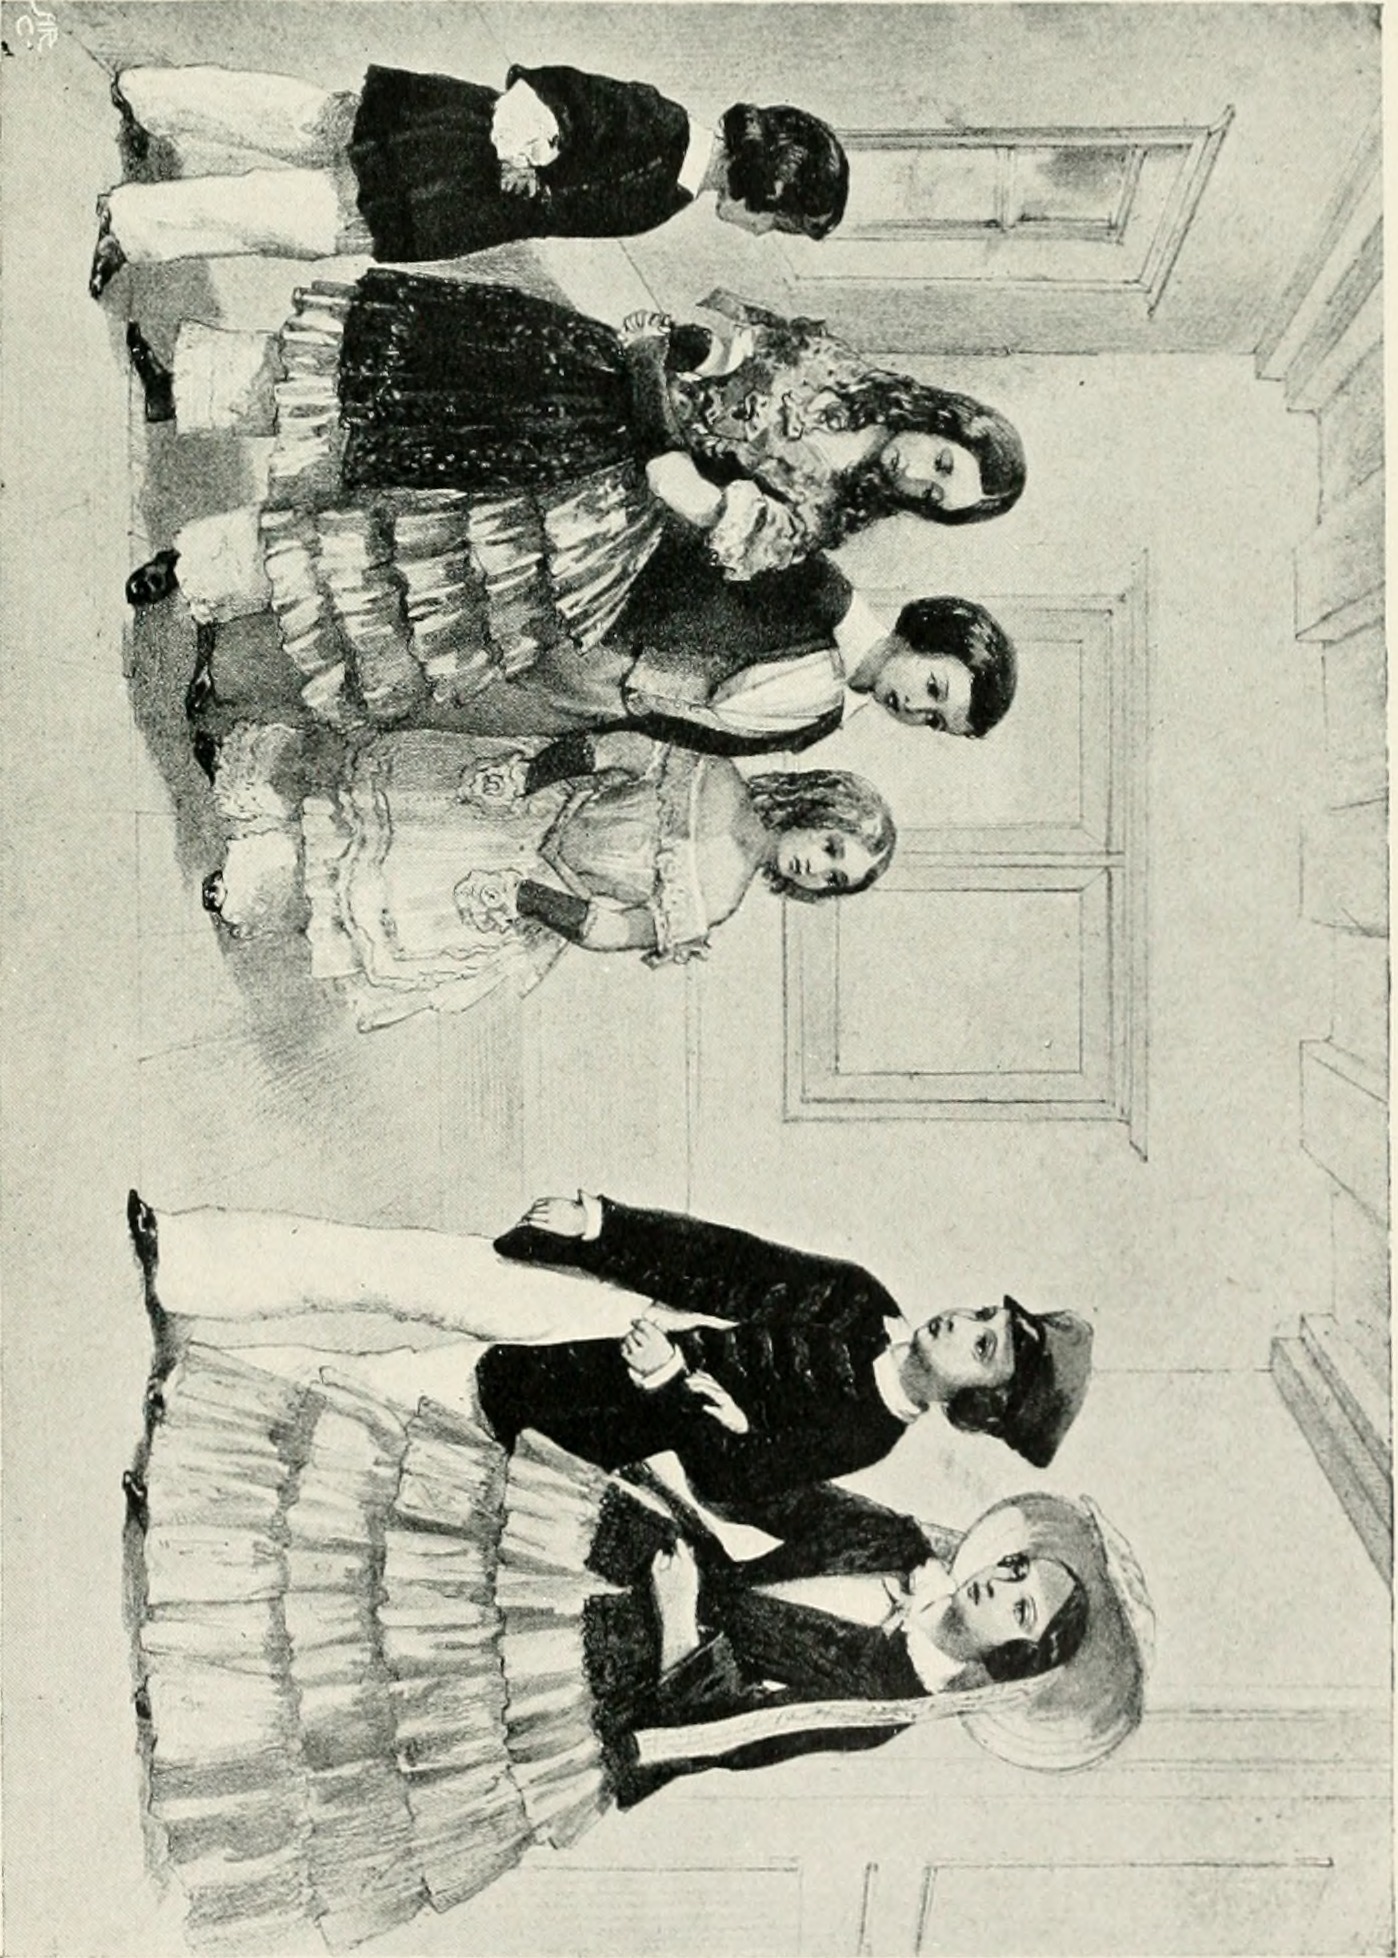 Image from page 324 of "The boyhood of a great king, 1841-1858 : an account of the early years of the life of His Majesty Edward VII" (1906)